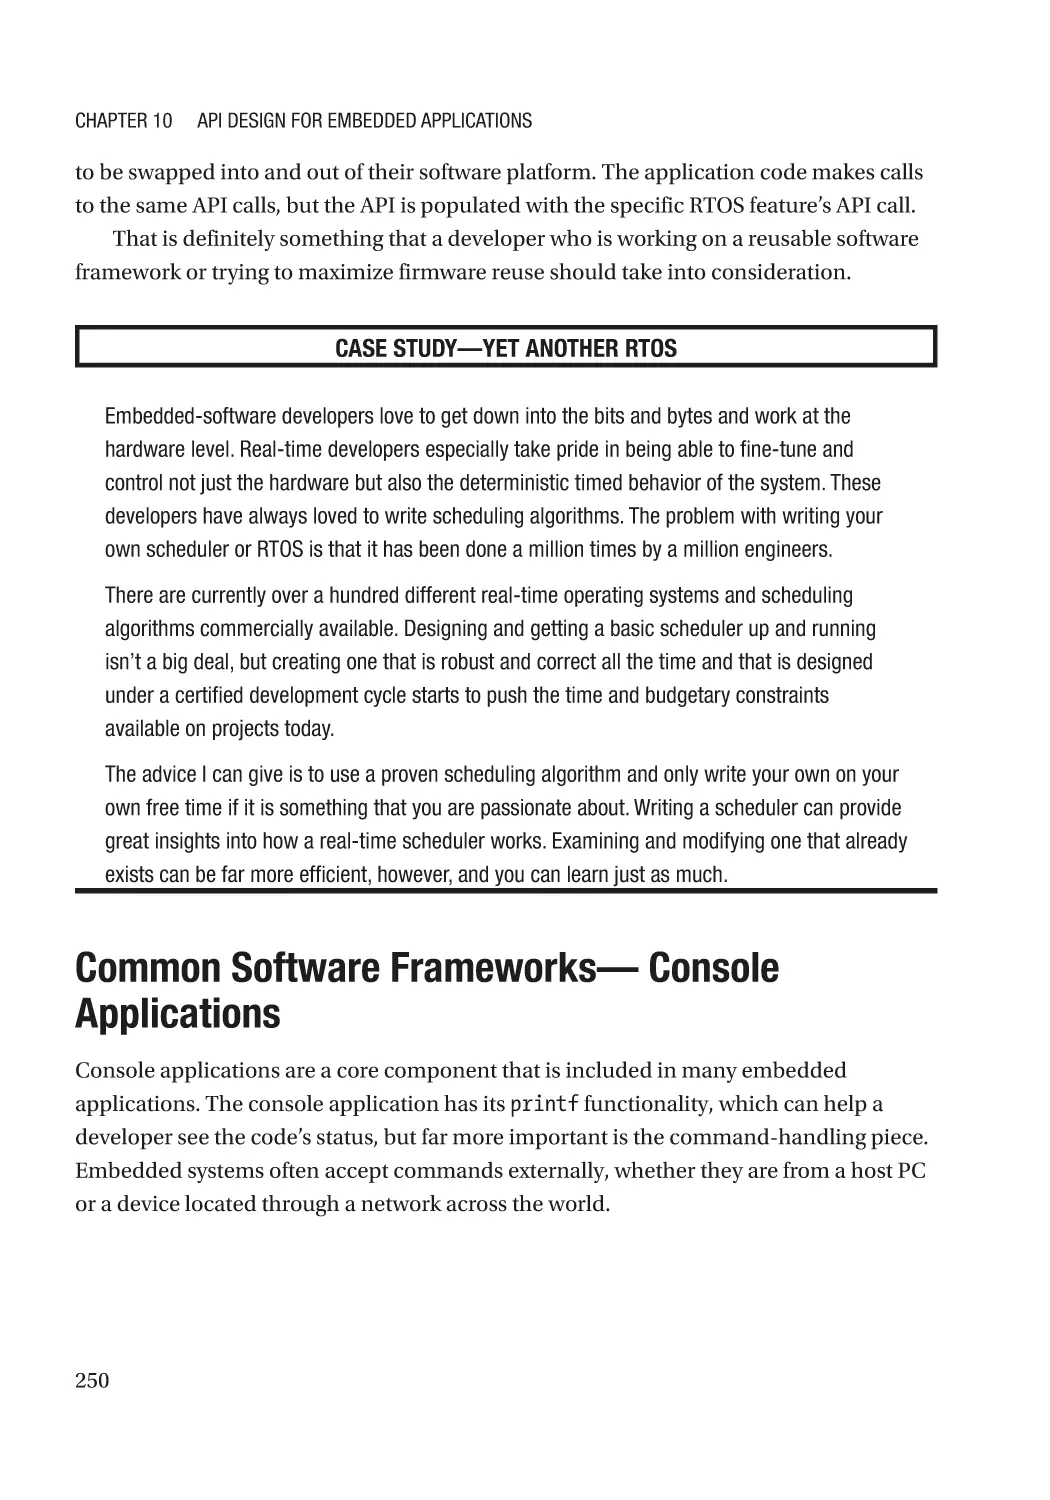 Common Software Frameworks— Console Applications